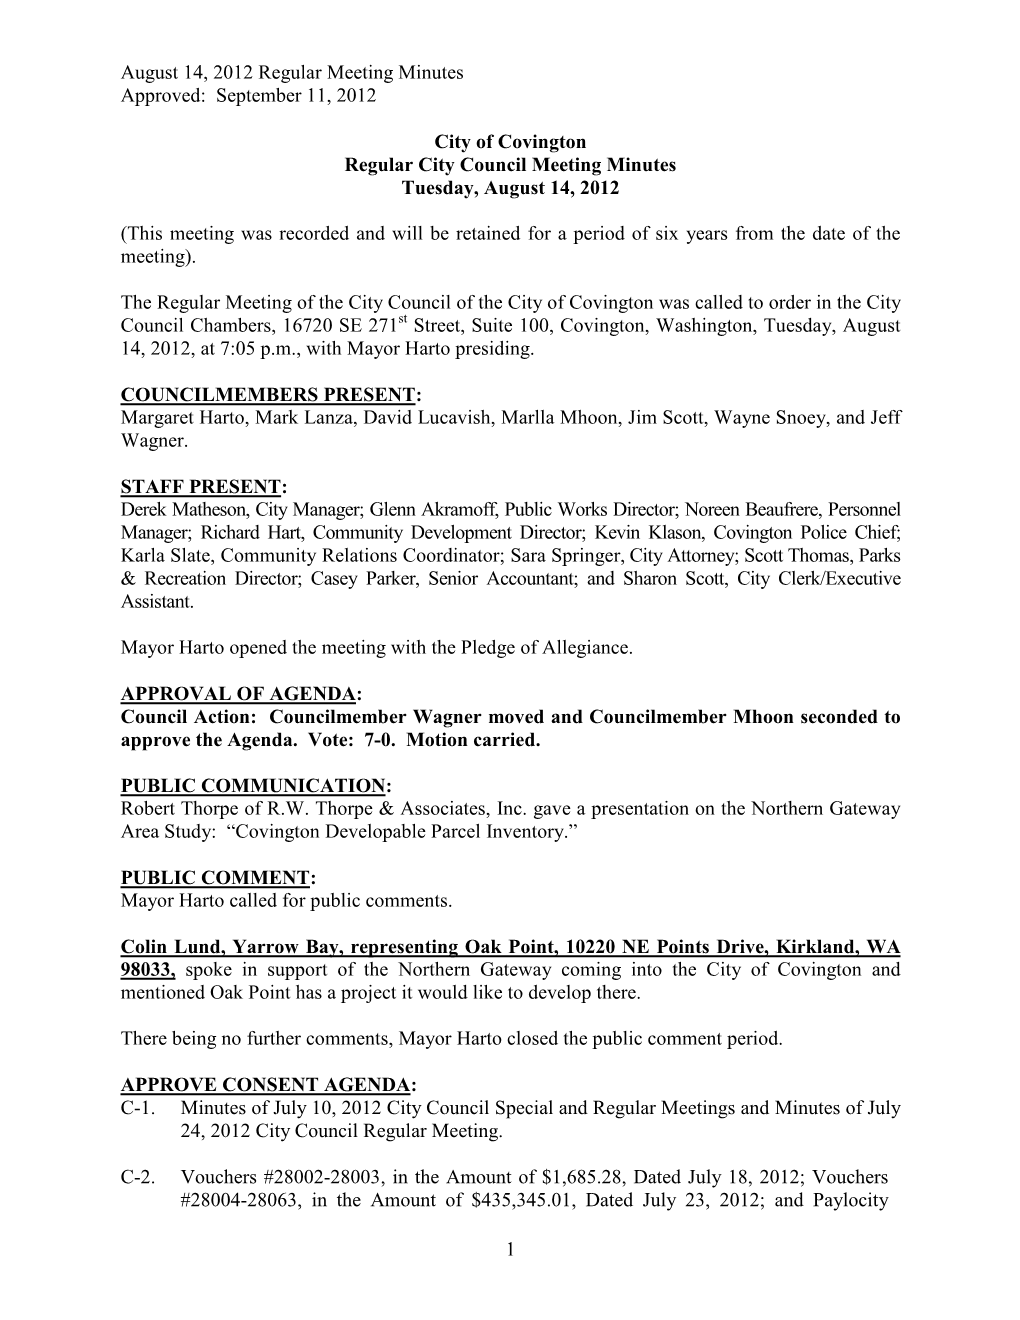 City of Covington Regular City Council Meeting Minutes Tuesday, August 14, 2012